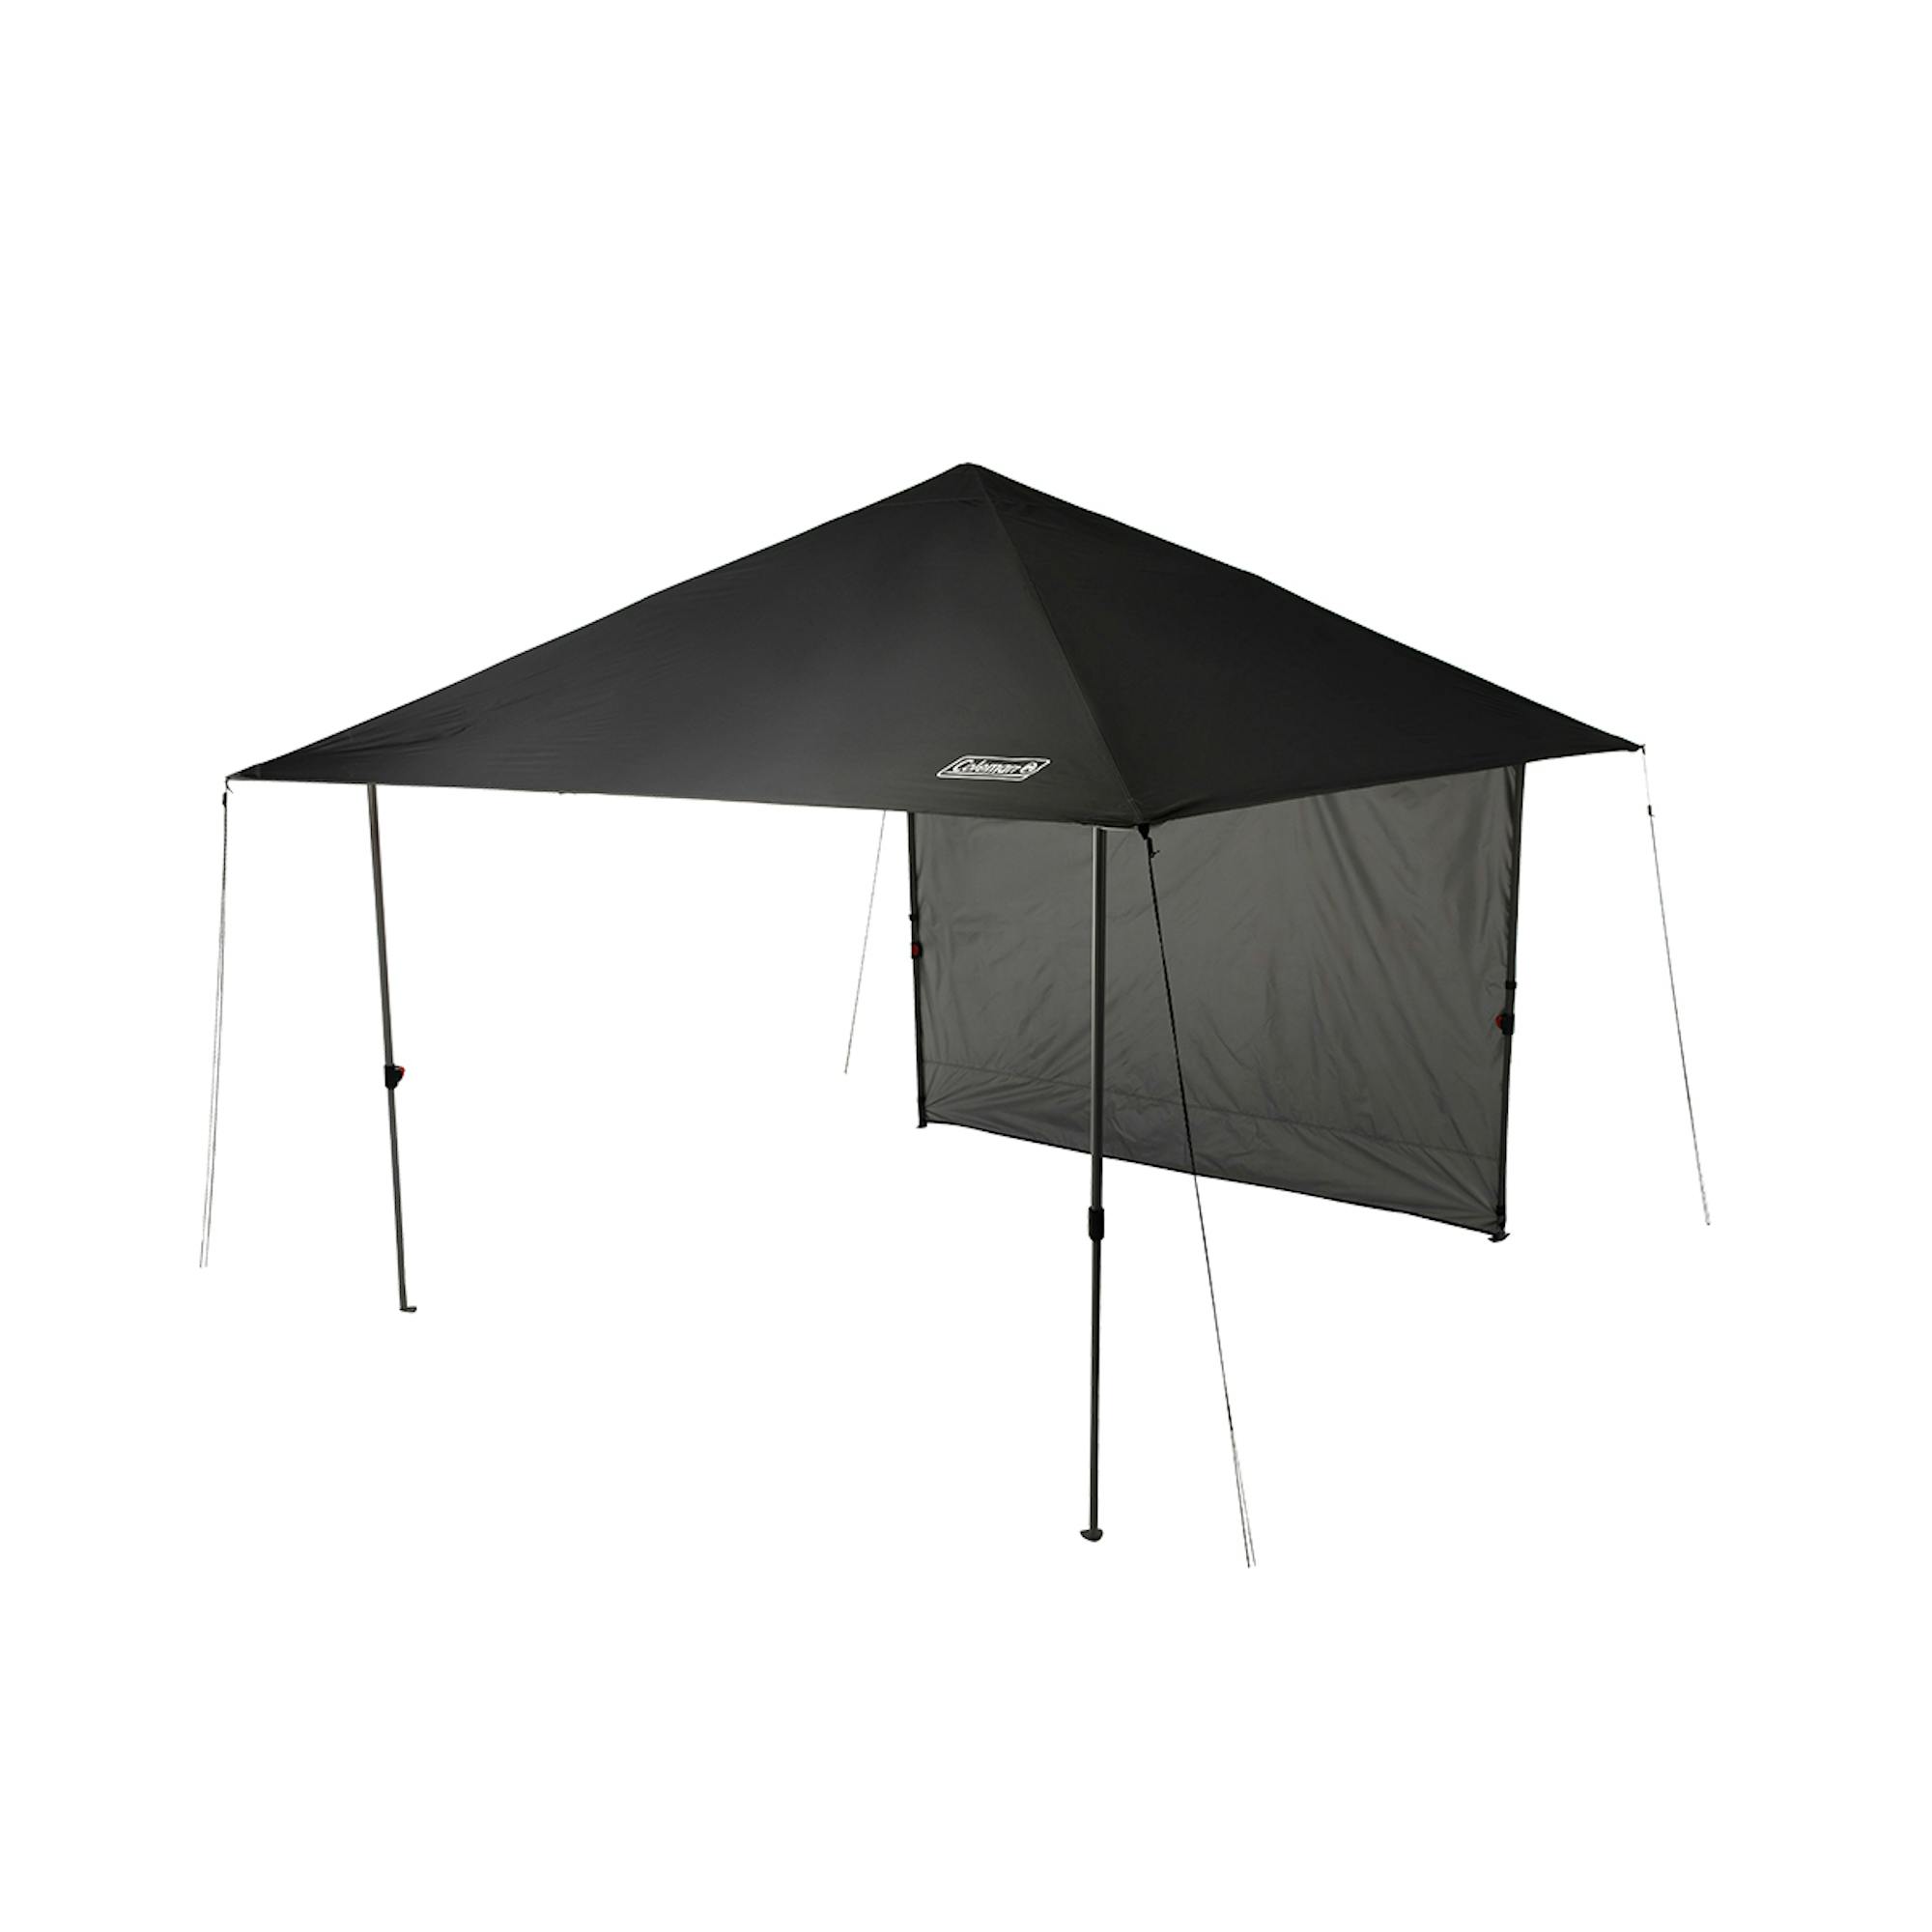 OASIS™ Lite 7 x 7 Canopy with Sun Wall | Coleman